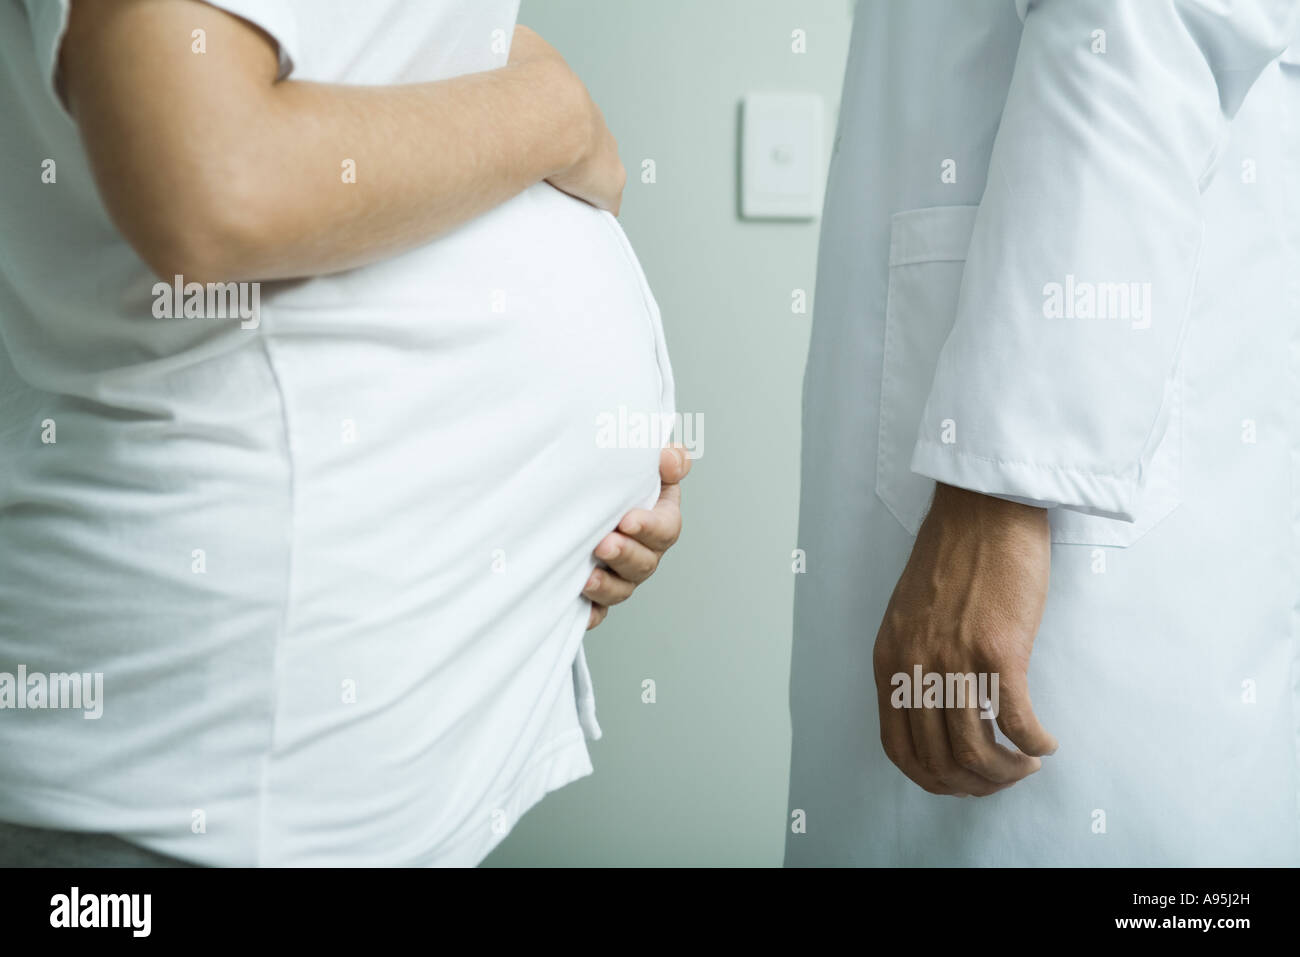 Pregnant woman standing face to face with doctor, mid section, side view Stock Photo